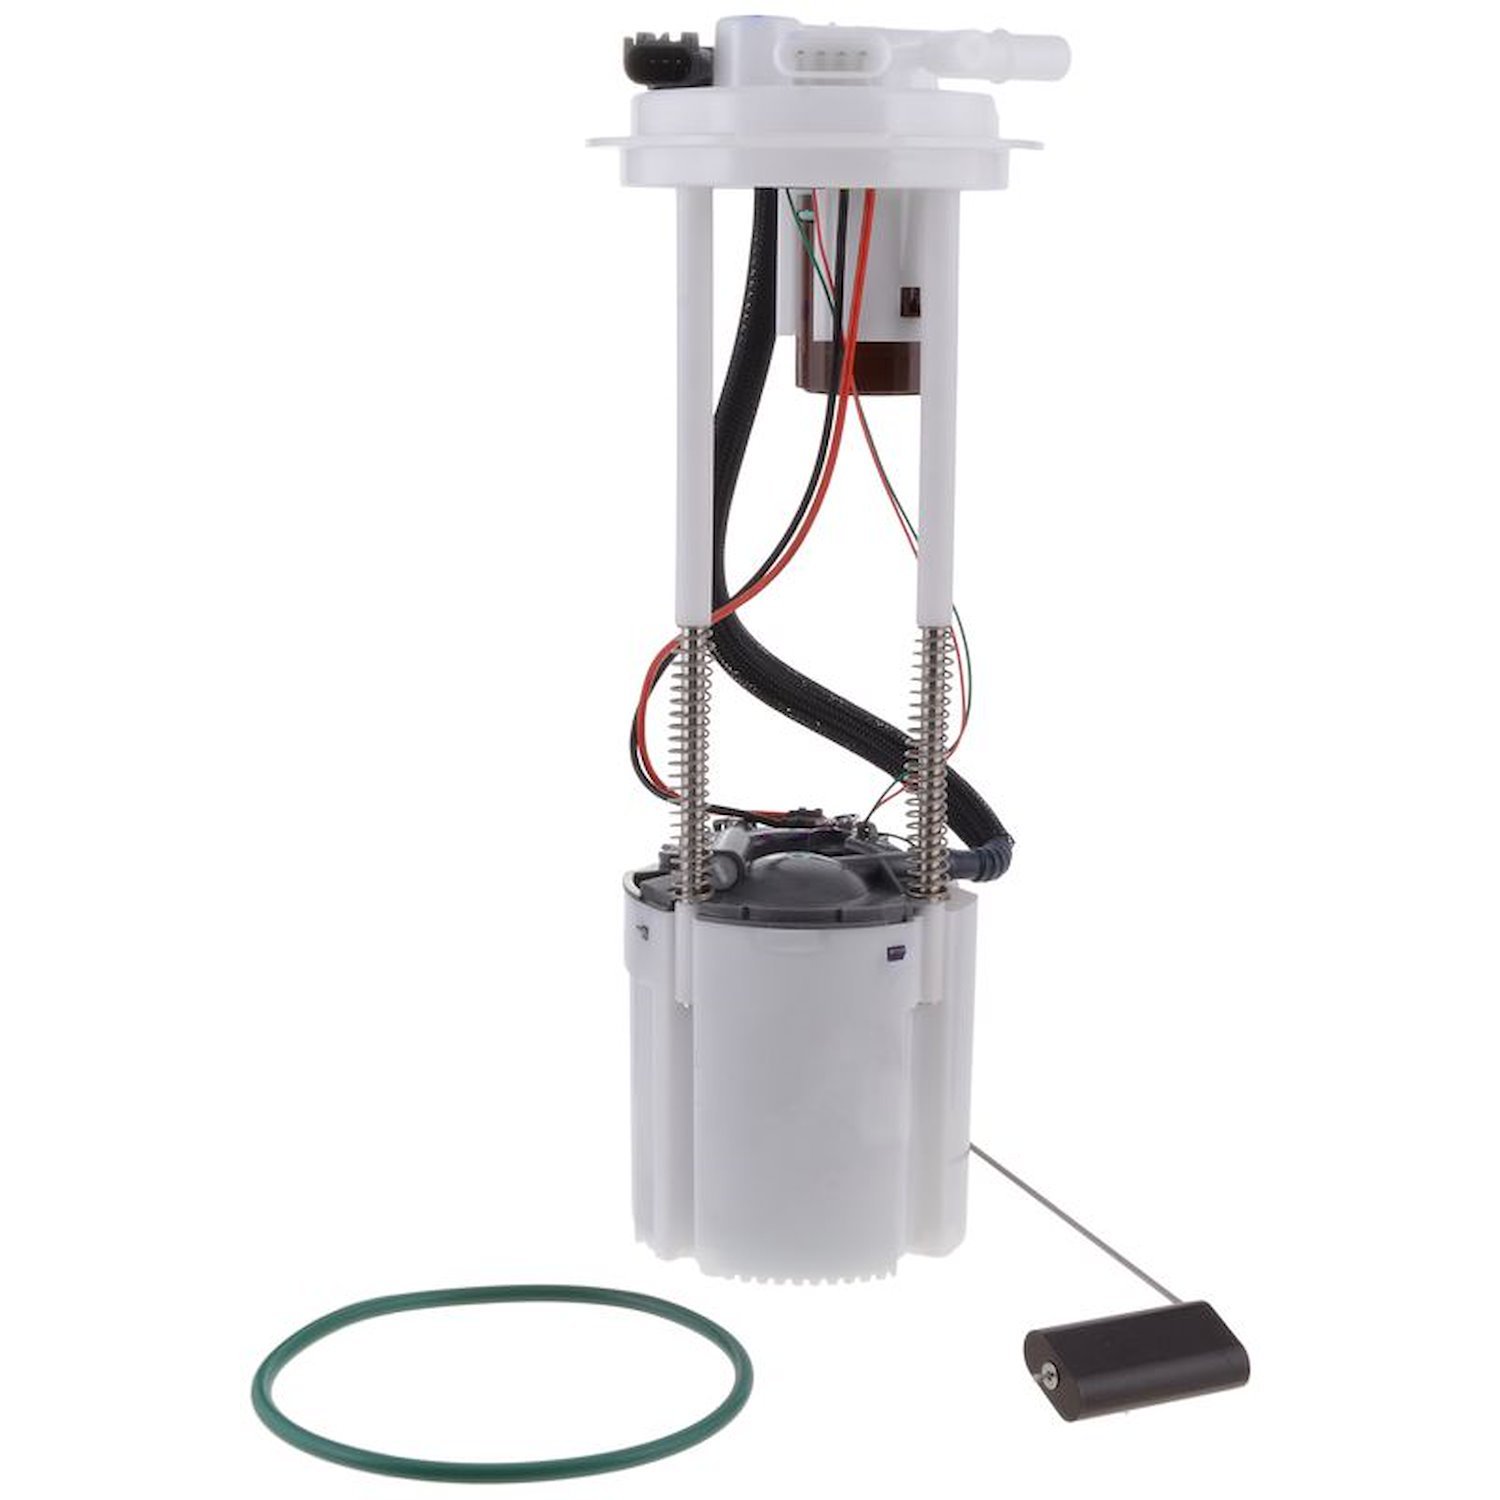 OE GM Replacement Electric Fuel Pump Module Assembly for 2010-2013 Chevy Silverado/GMC Sierra 1500